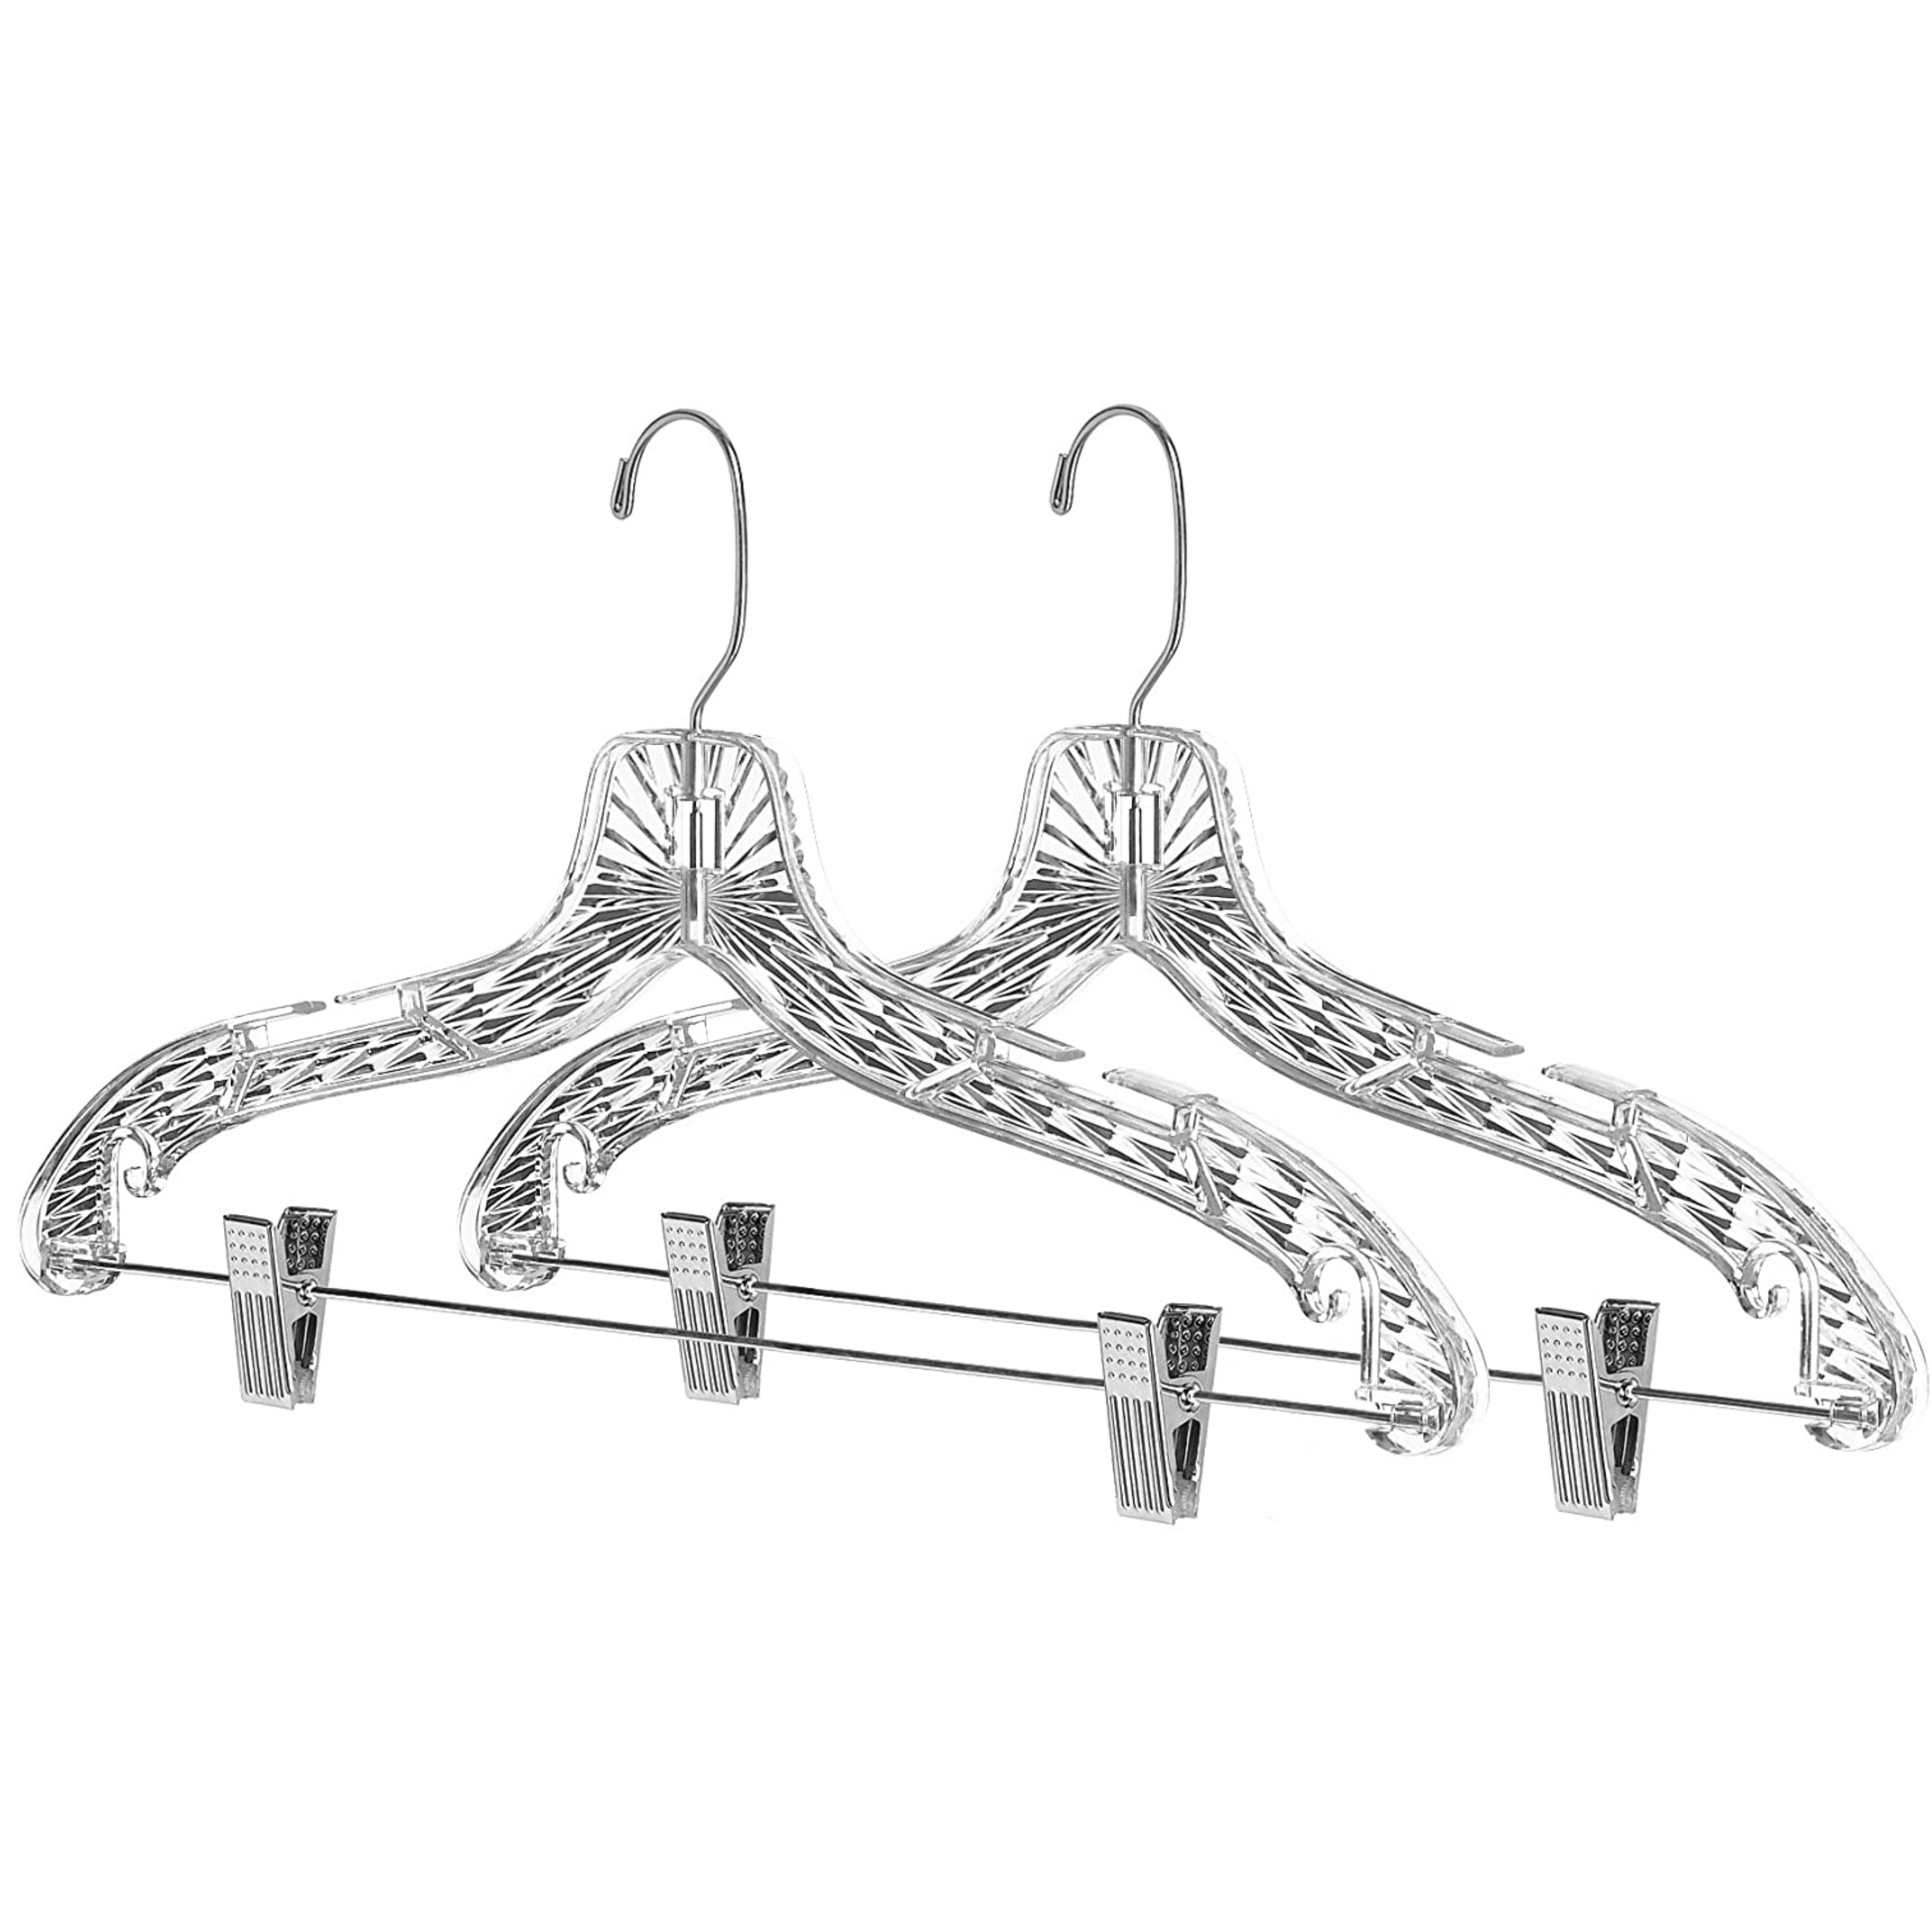 Crystal Suit Hangers with Clips – Set of 2